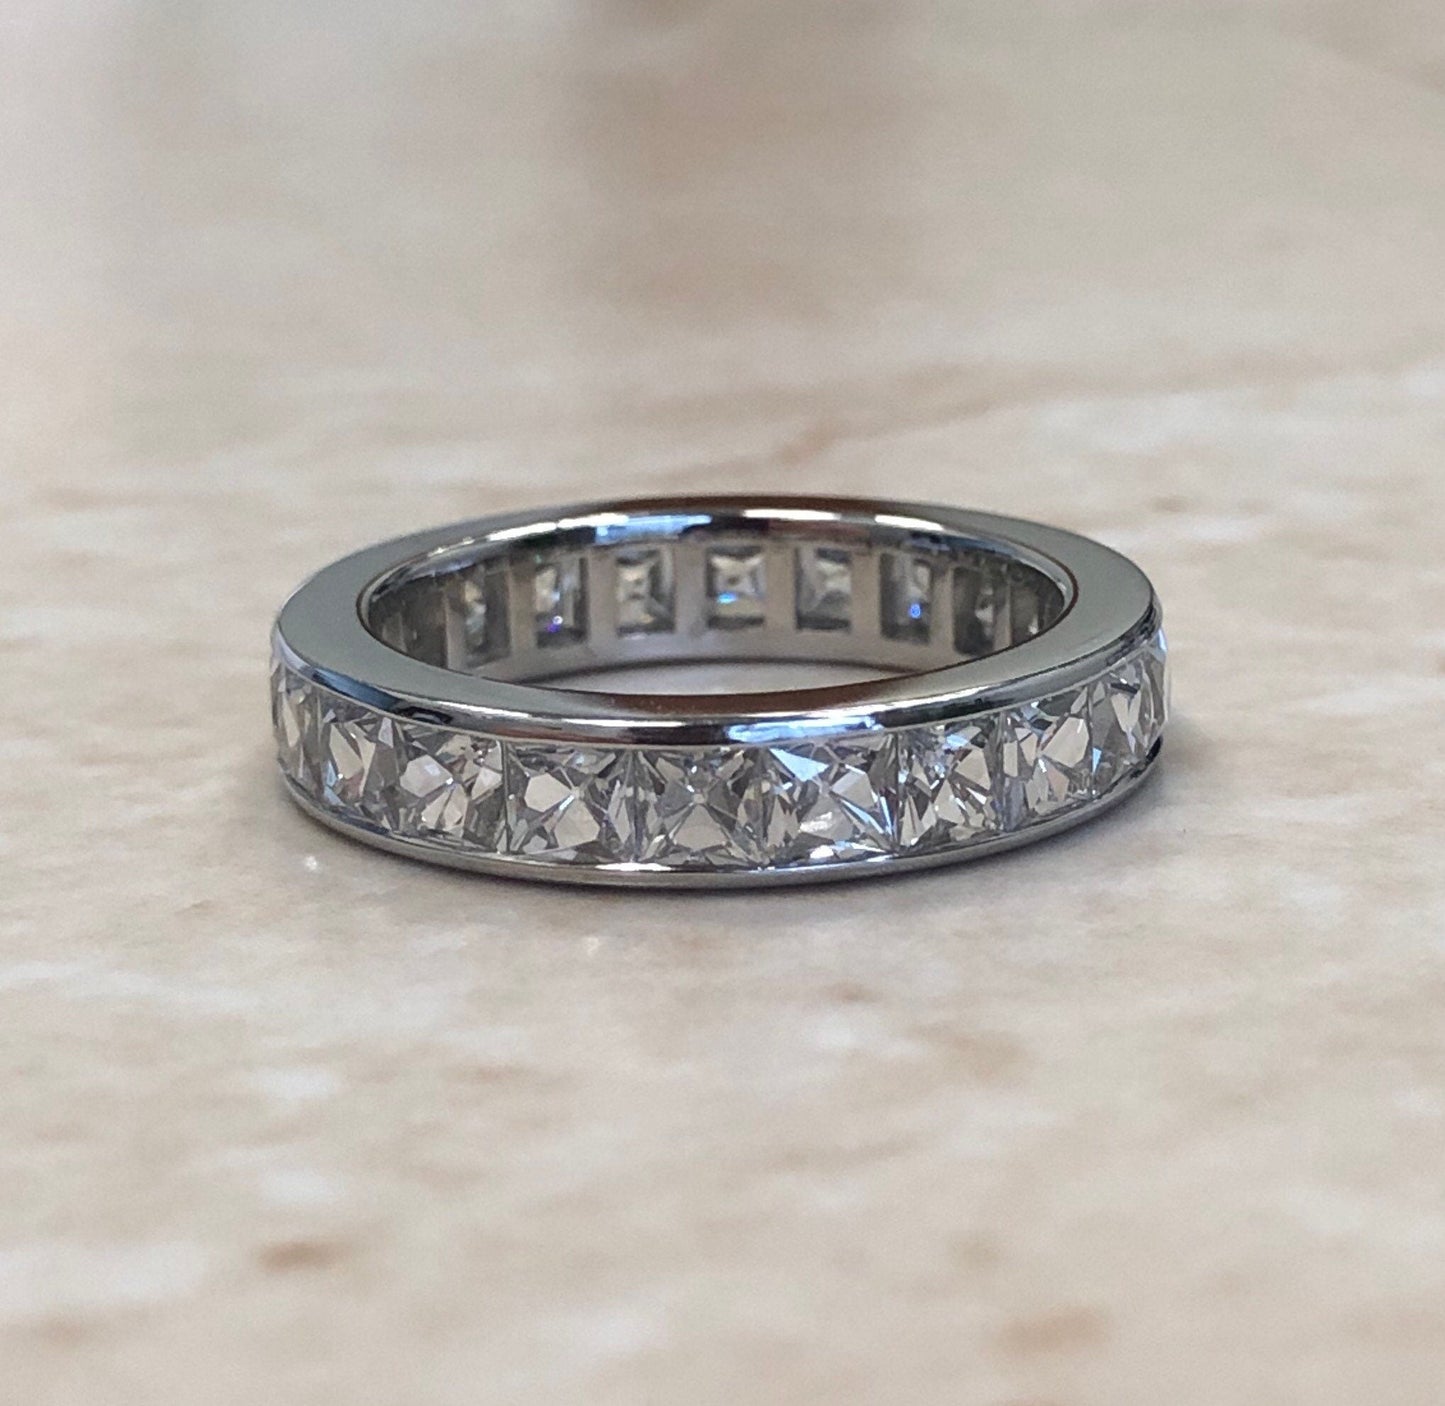 French Cut Diamond Eternity Band Handcrafted In Platinum - Eternity Ring - Wedding Ring - Bridal Jewelry - 3.75 CTTW